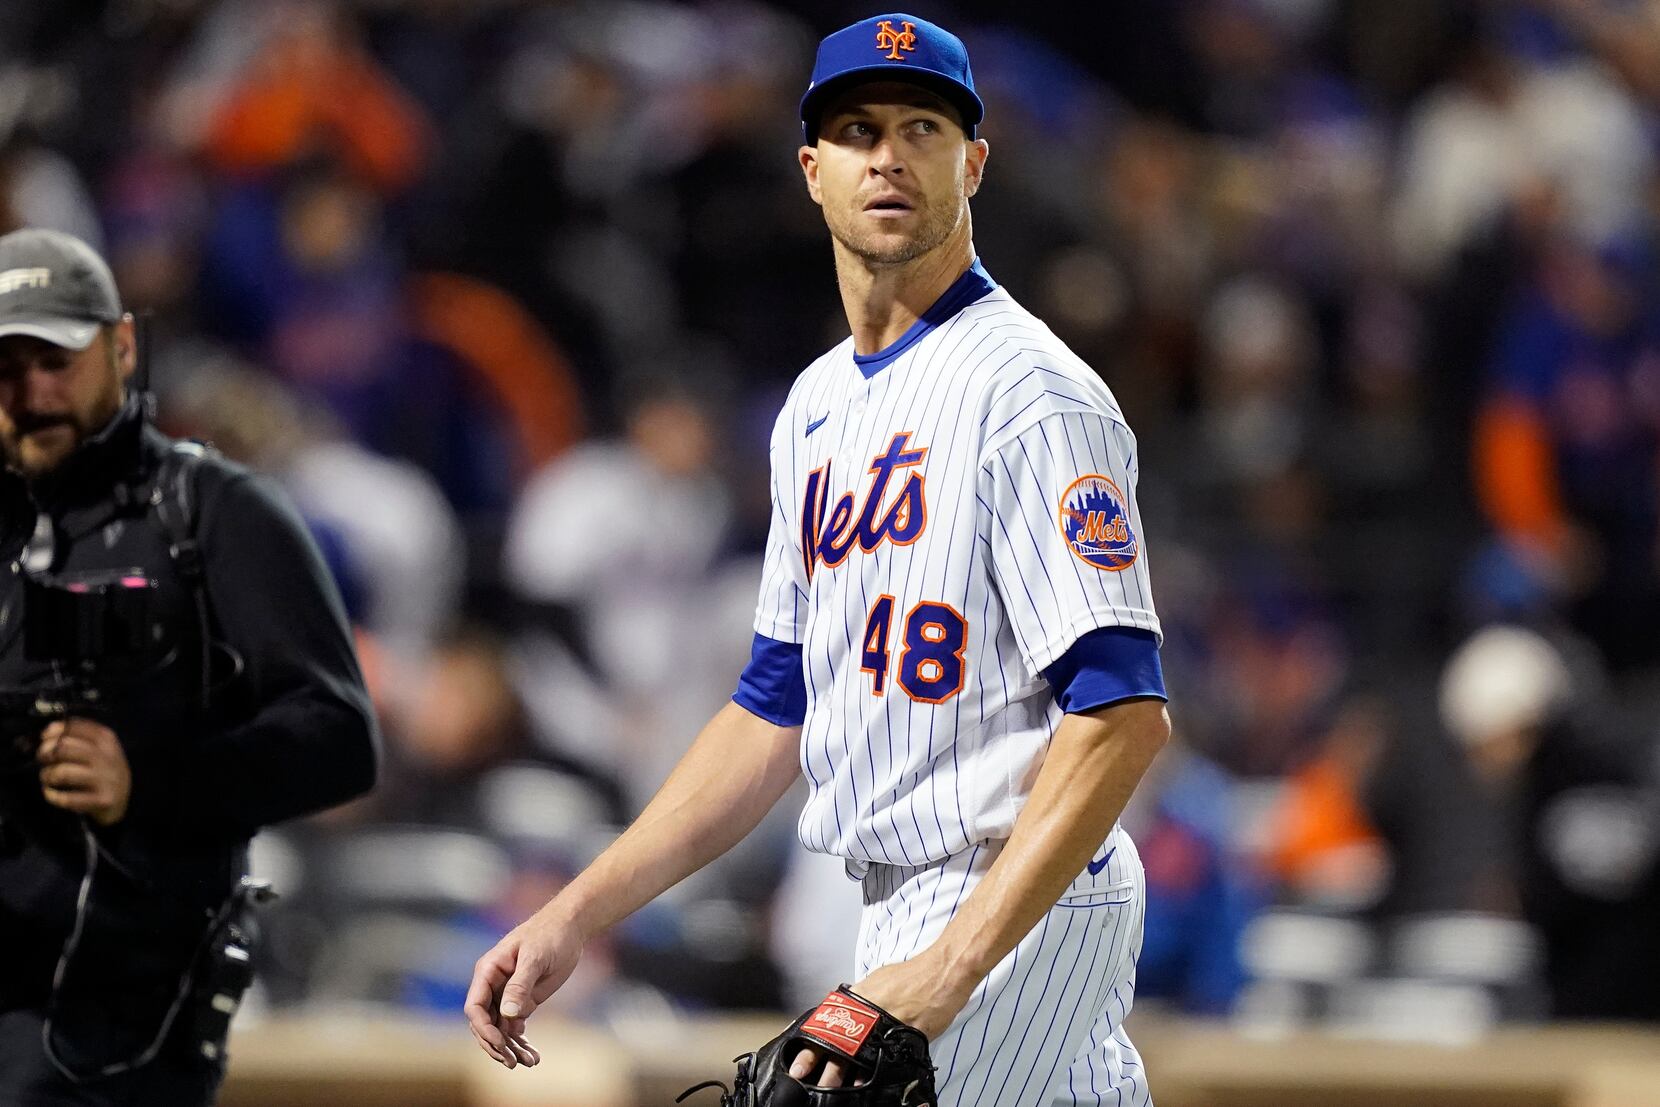 10 things to know about new Rangers ace Jacob deGrom, including his past as  an infielder